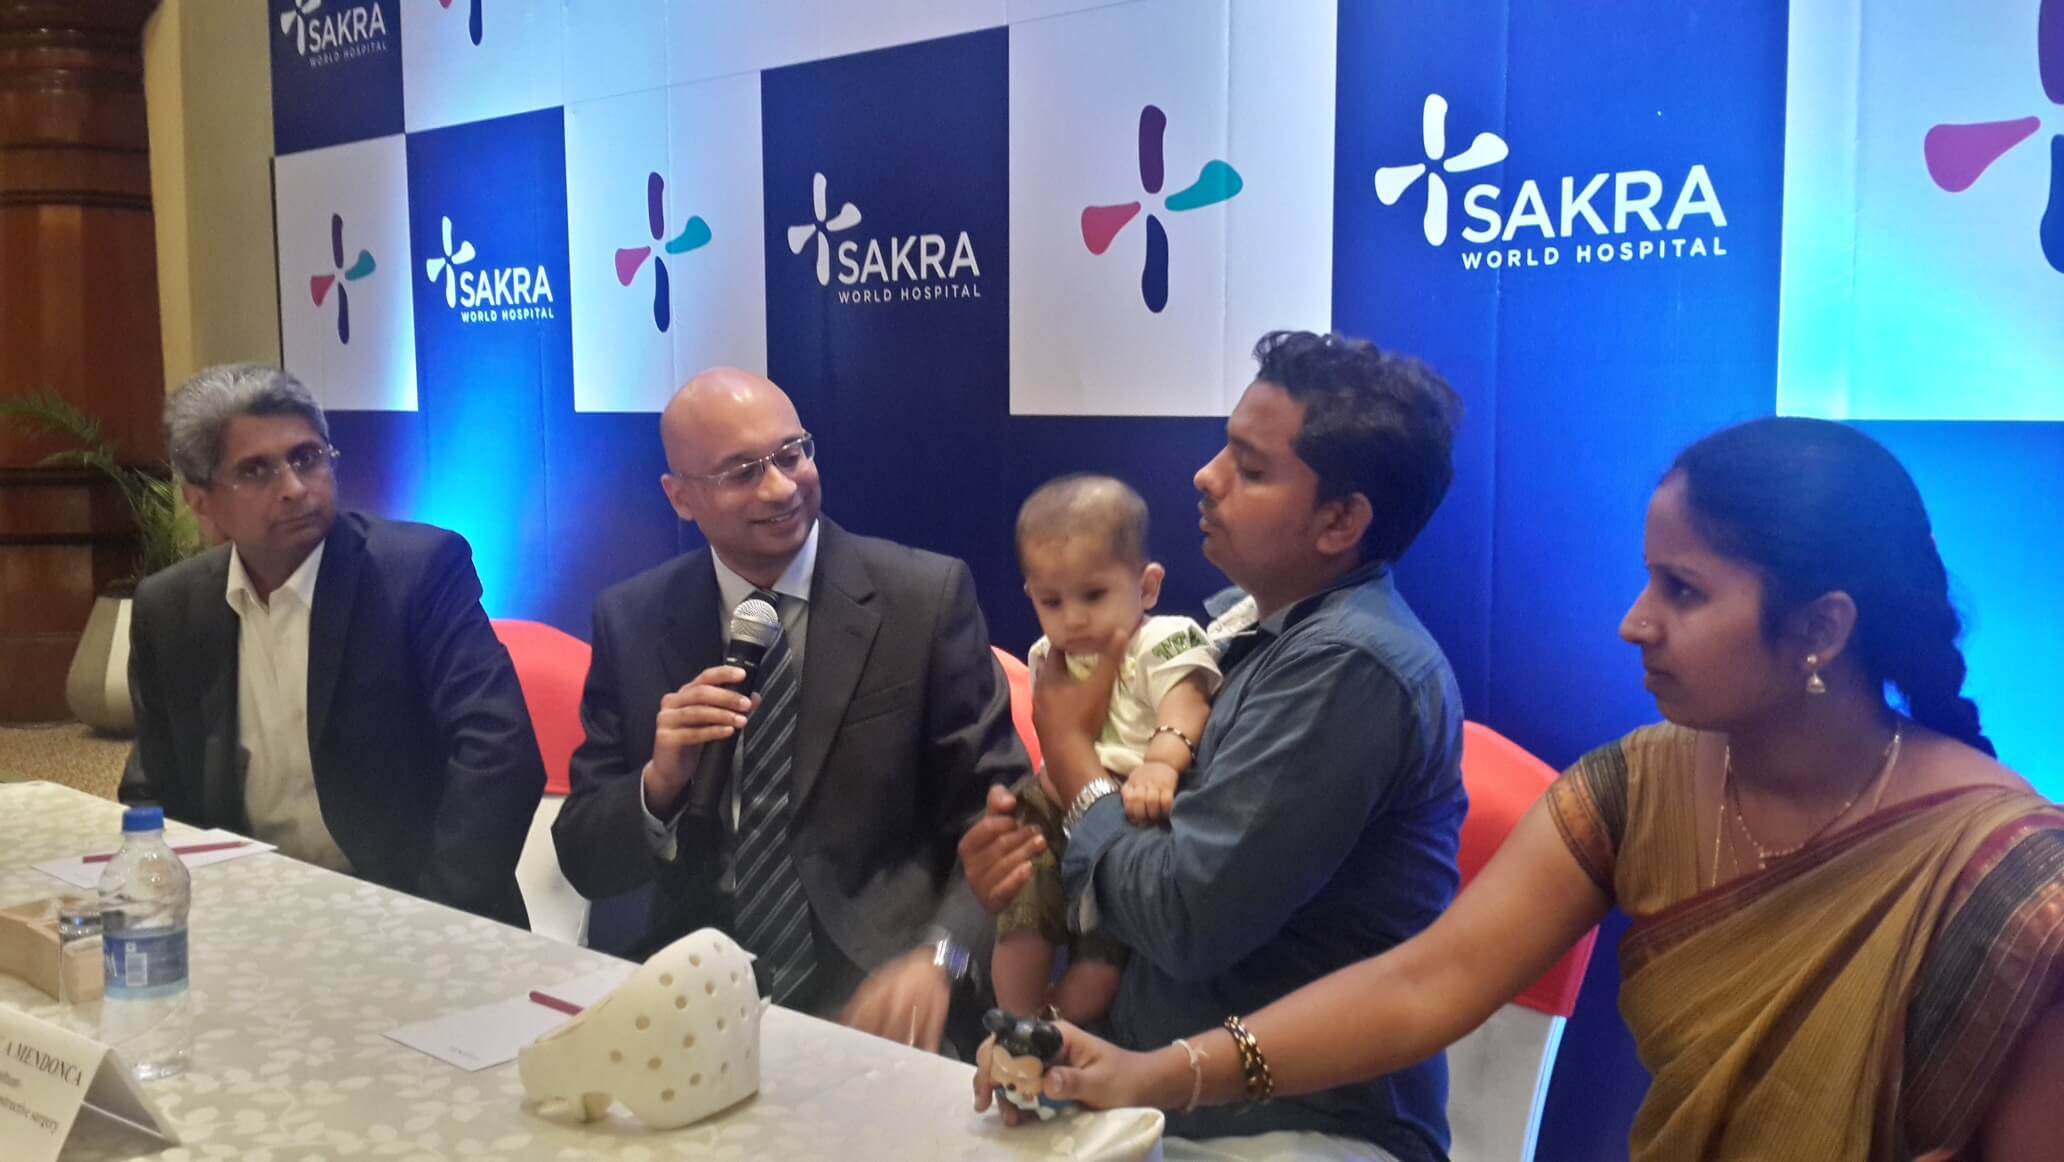 Endoscopic skull expansion surgery first time in India at Sakra World Hospital